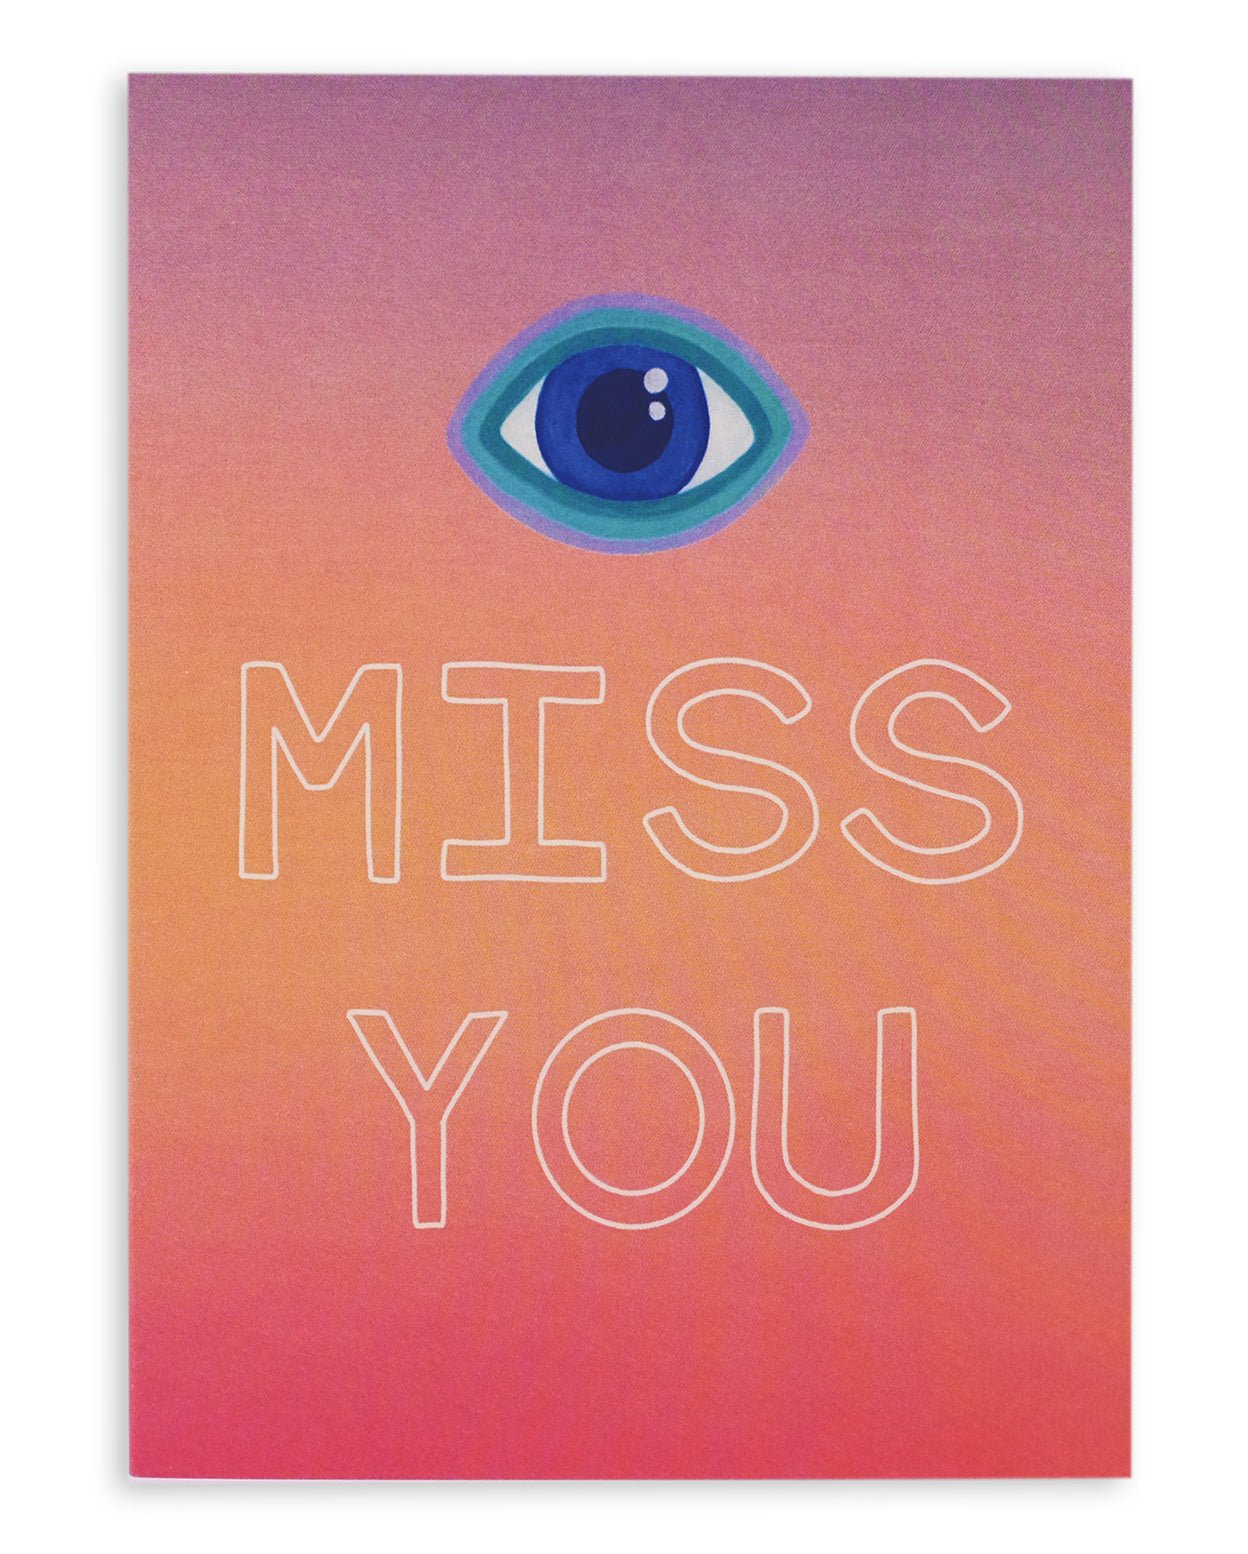 Greeting card with the symbol of an eye followed by the words "Miss You" in white hollow font on a gradient purple, orange and red cardstock. Shown against a white background.